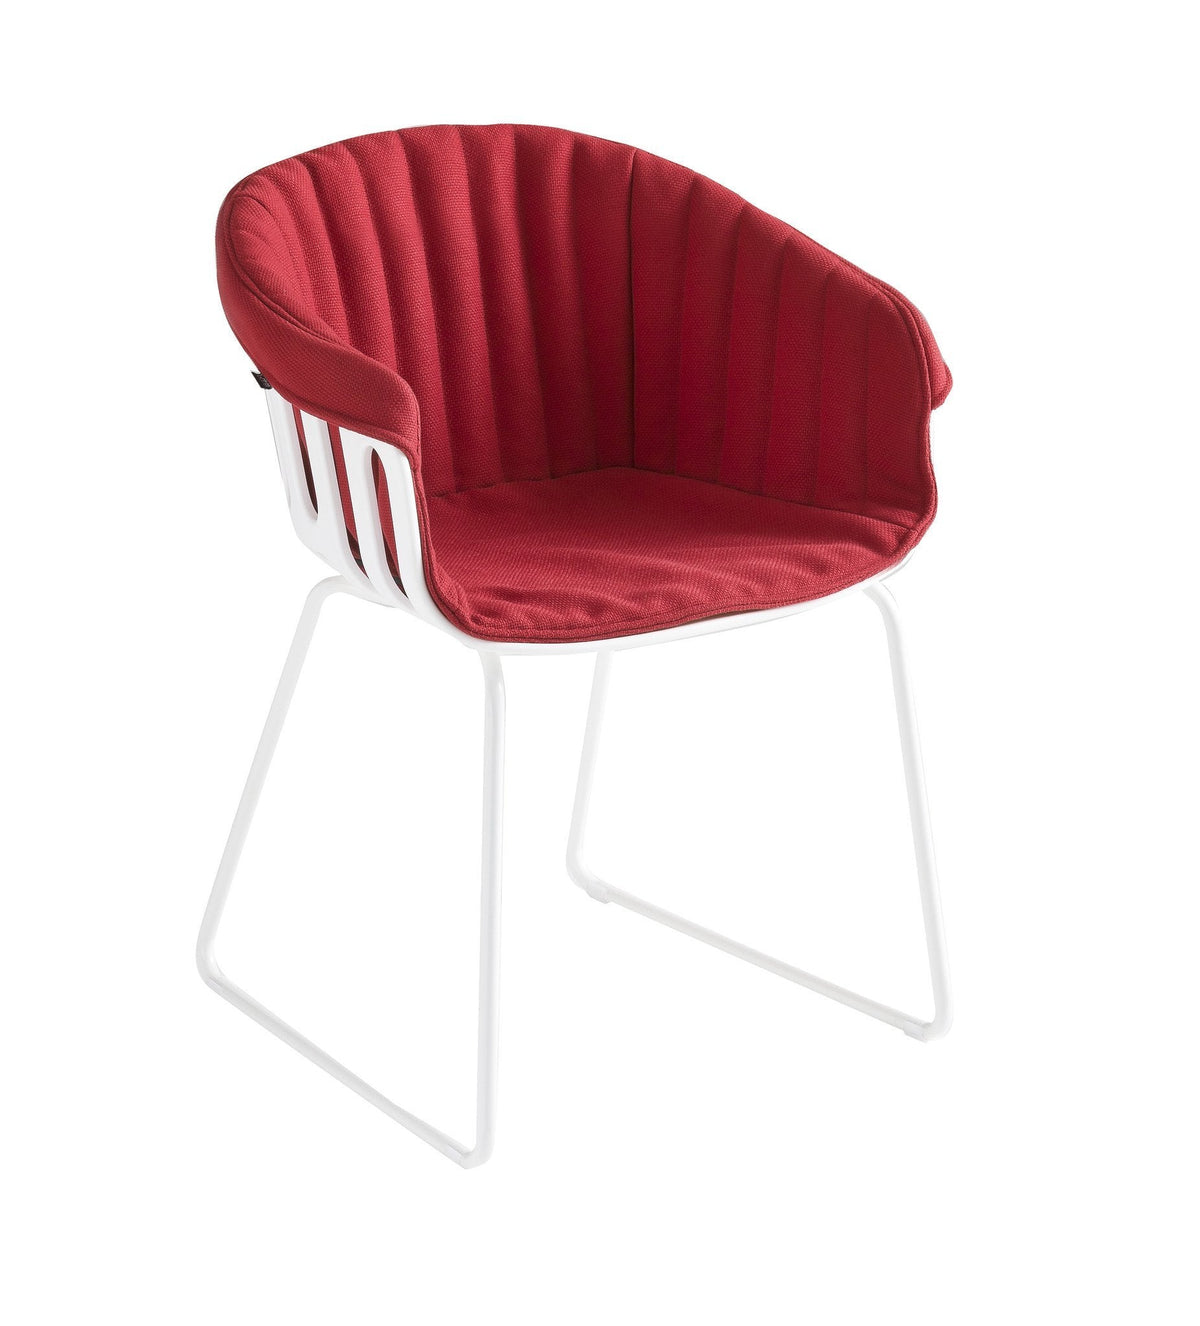 Basket Armchair Cushion-Gaber-Contract Furniture Store